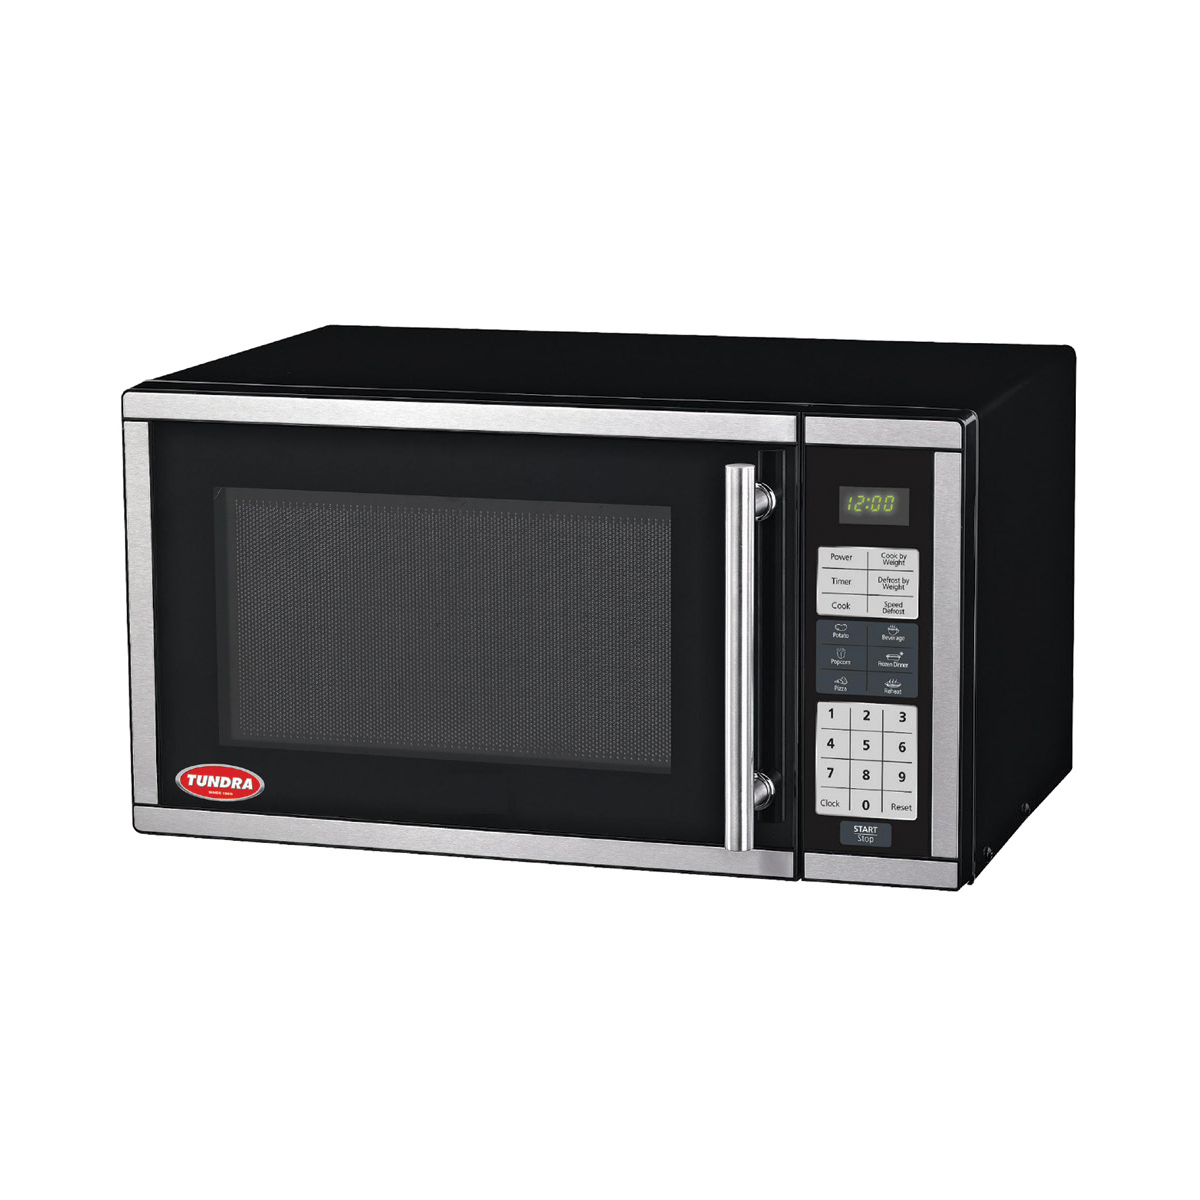 TUNDRA TRUCK MICROWAVE OVEN - MW SERIES - 120 V - MW700 : Pana-Pacific